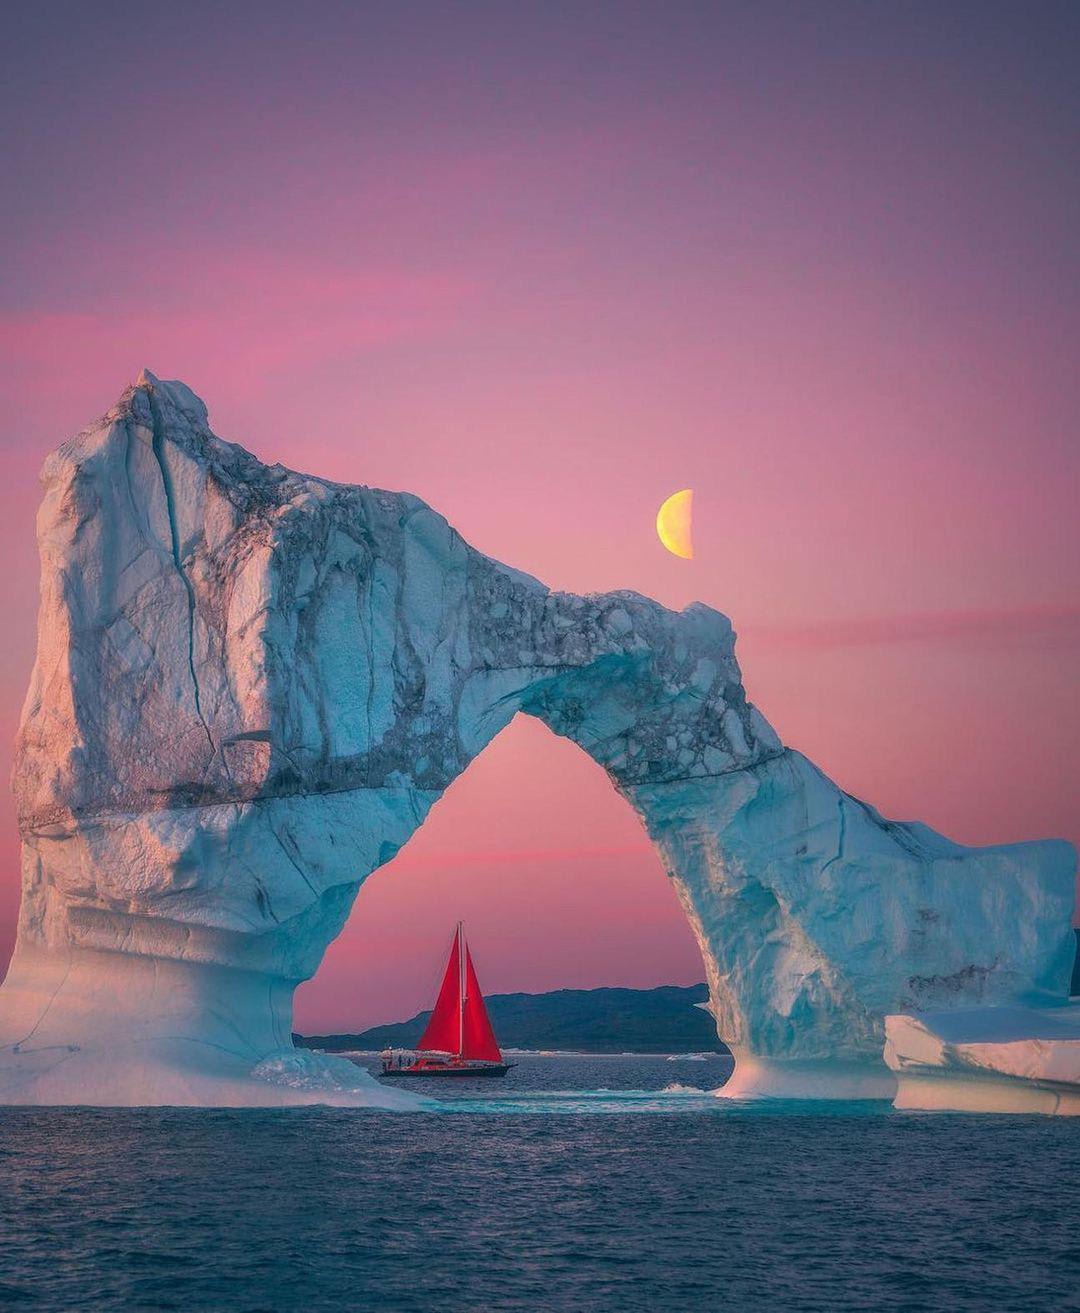 This sailboat in Greenland